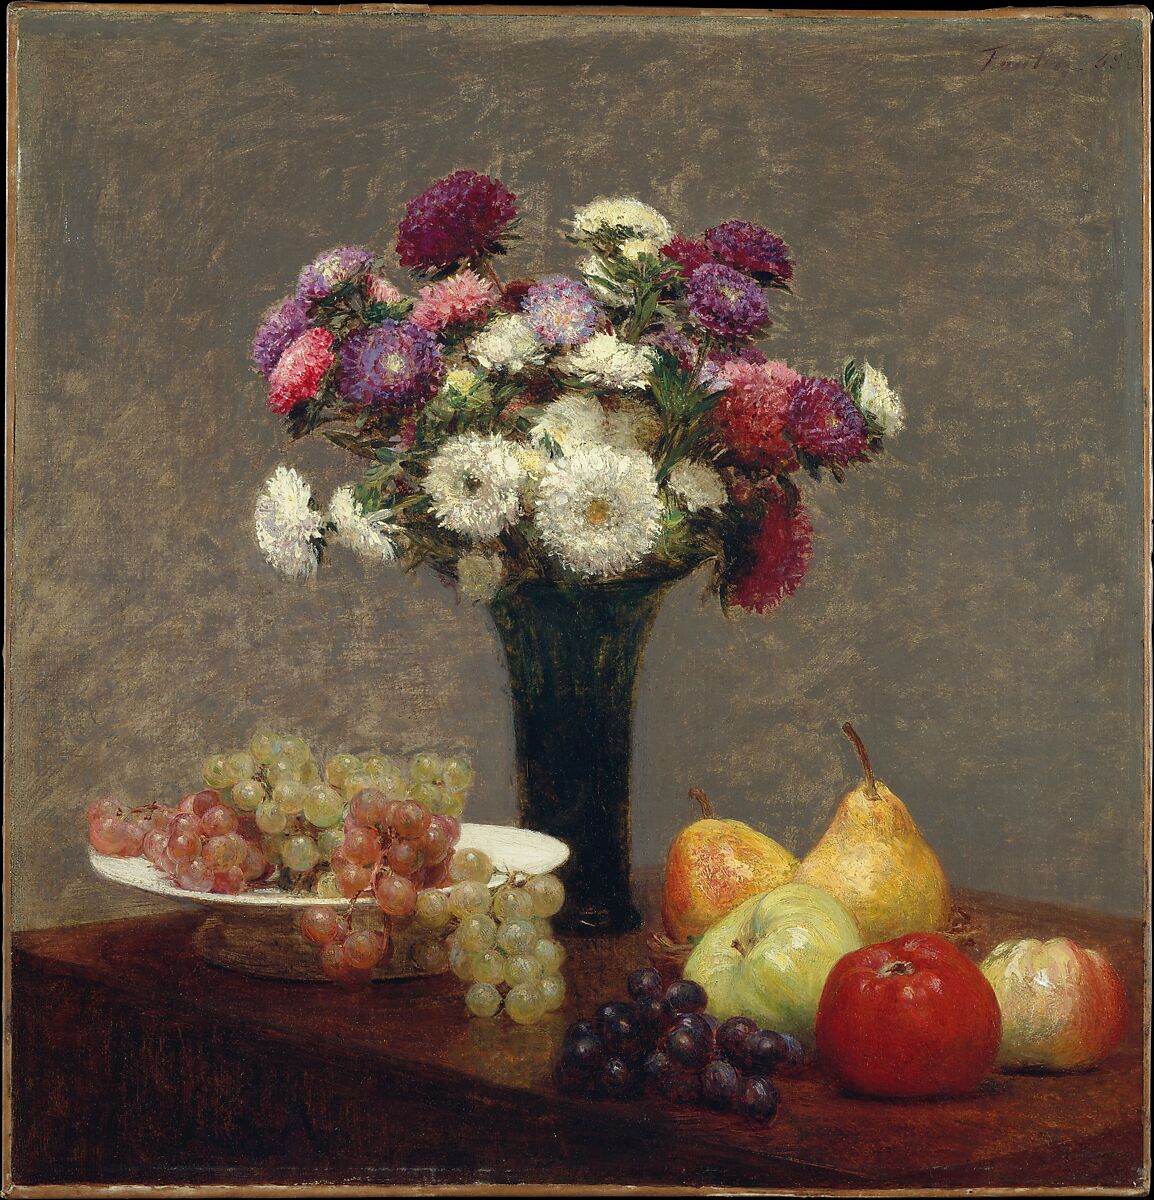 Henri Fantin-Latour | Asters and Fruit on a Table | The